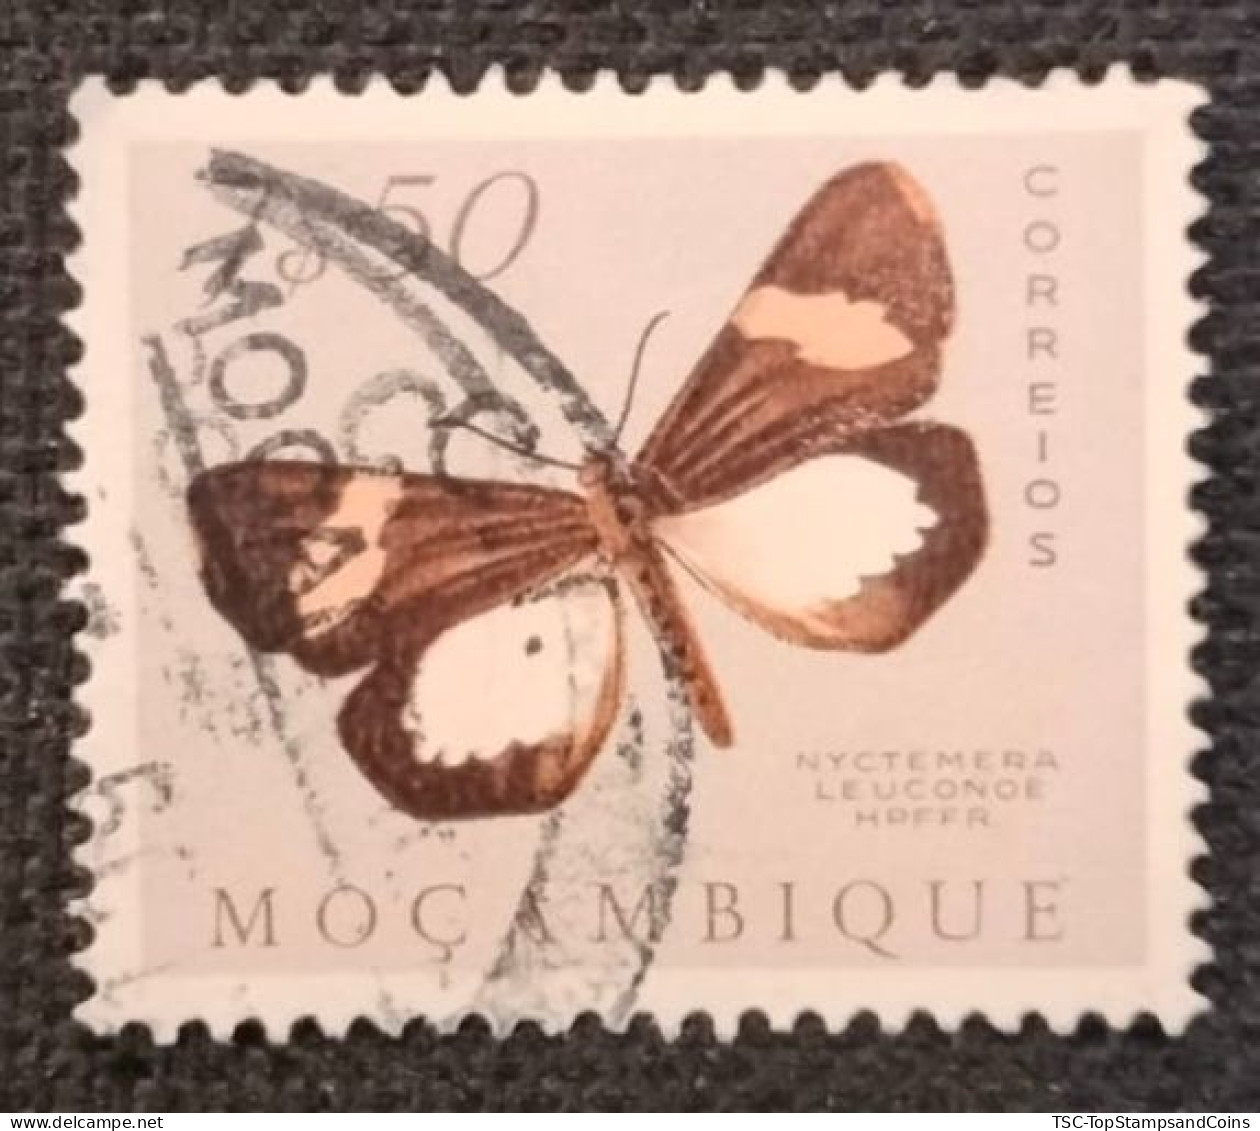 MOZPO0405UB - Mozambique Butterflies - 7$50 Used Stamp - Mozambique - 1953 - Mosambik